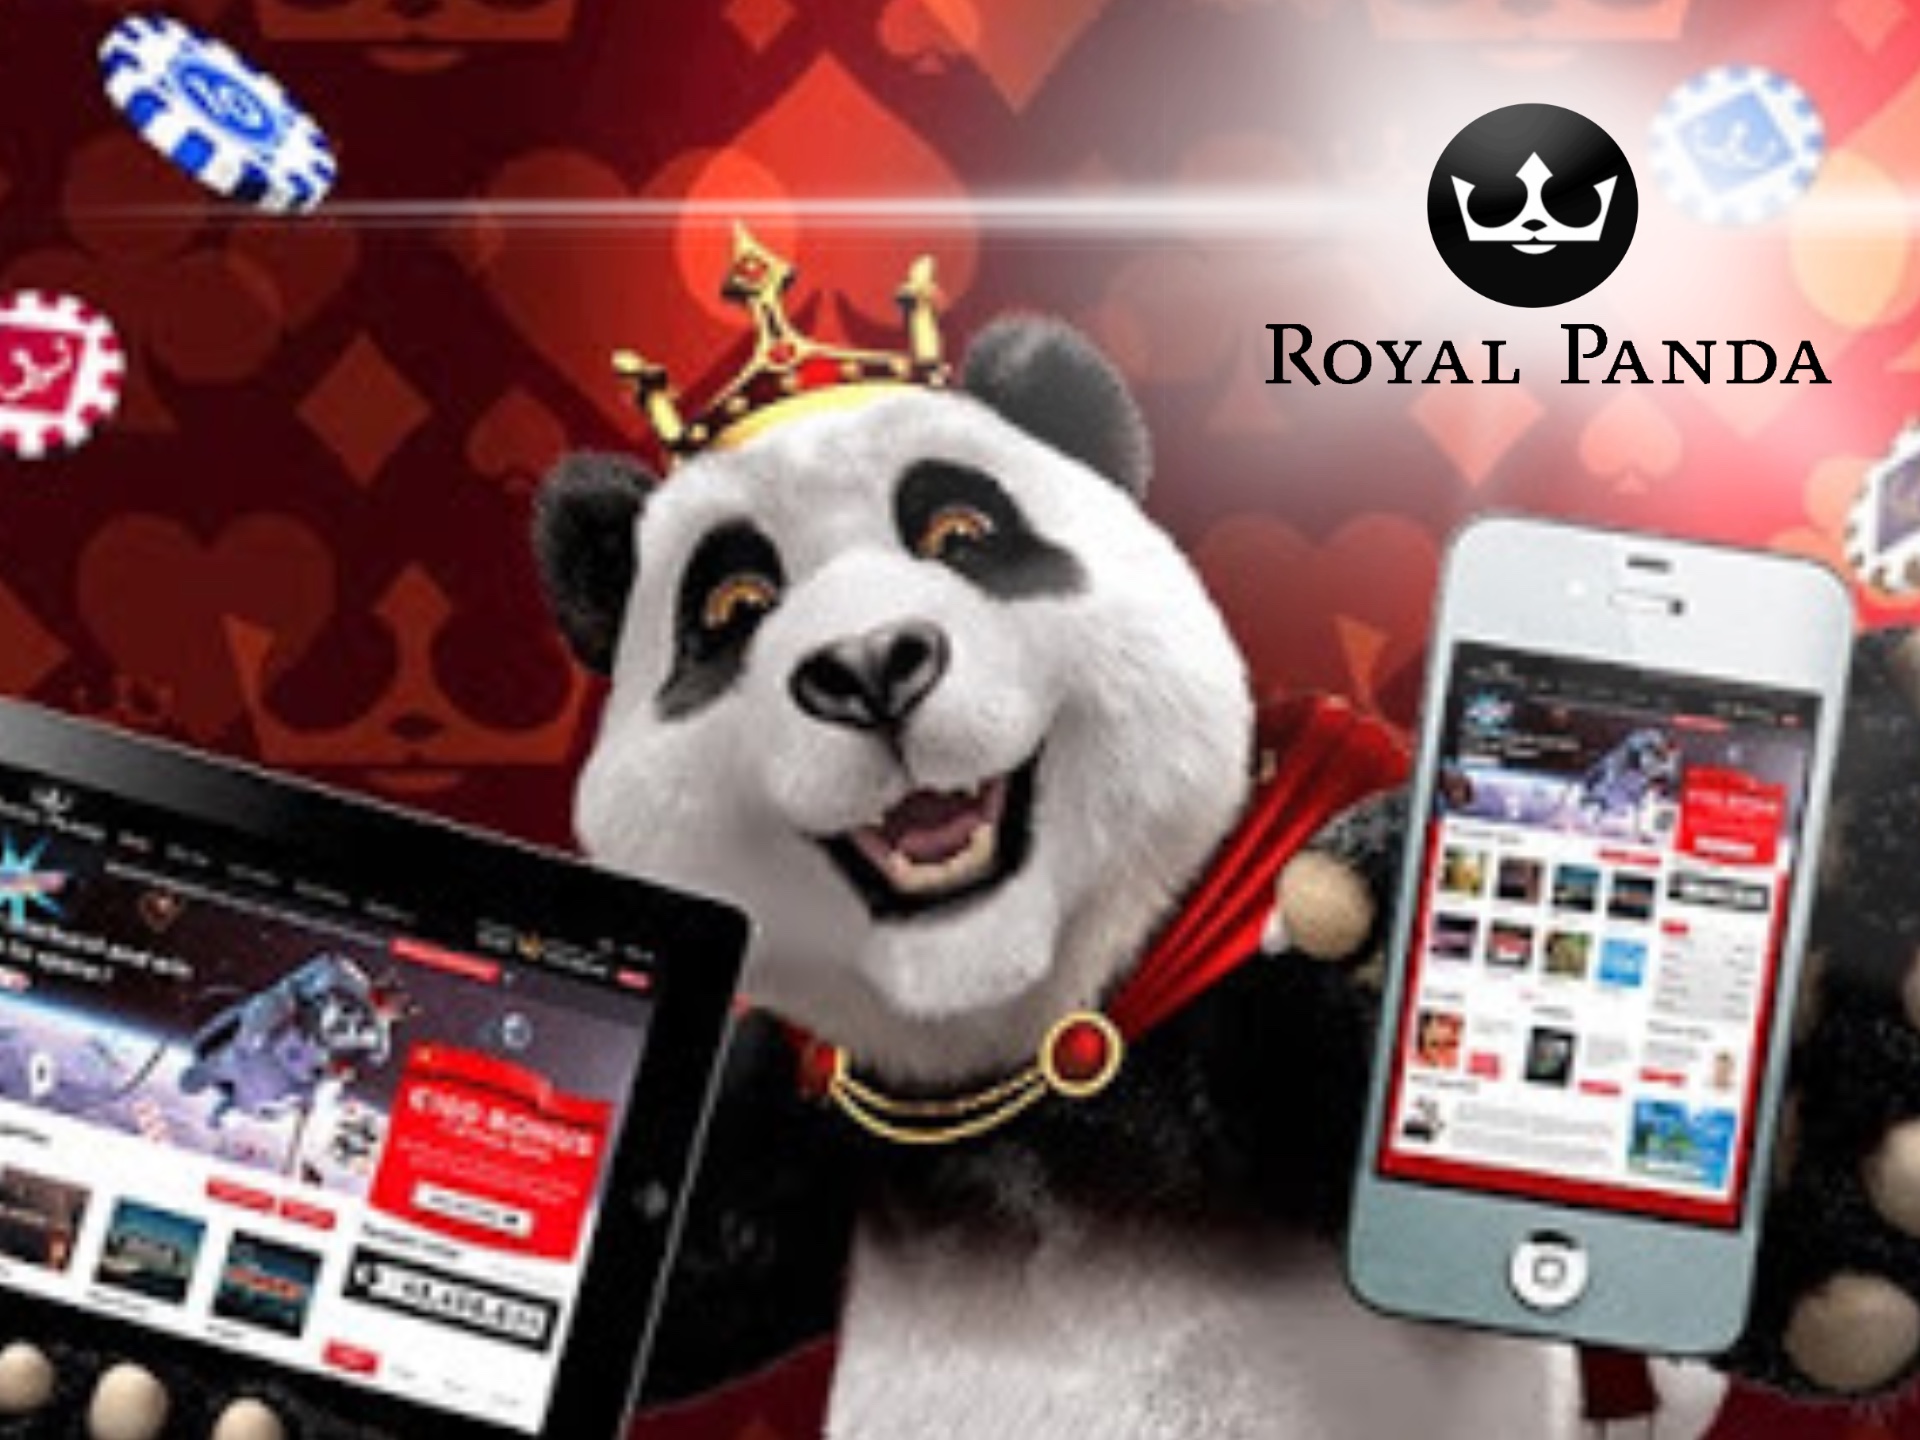 Register an Royal Panda, make your first deposit and start playing on money.